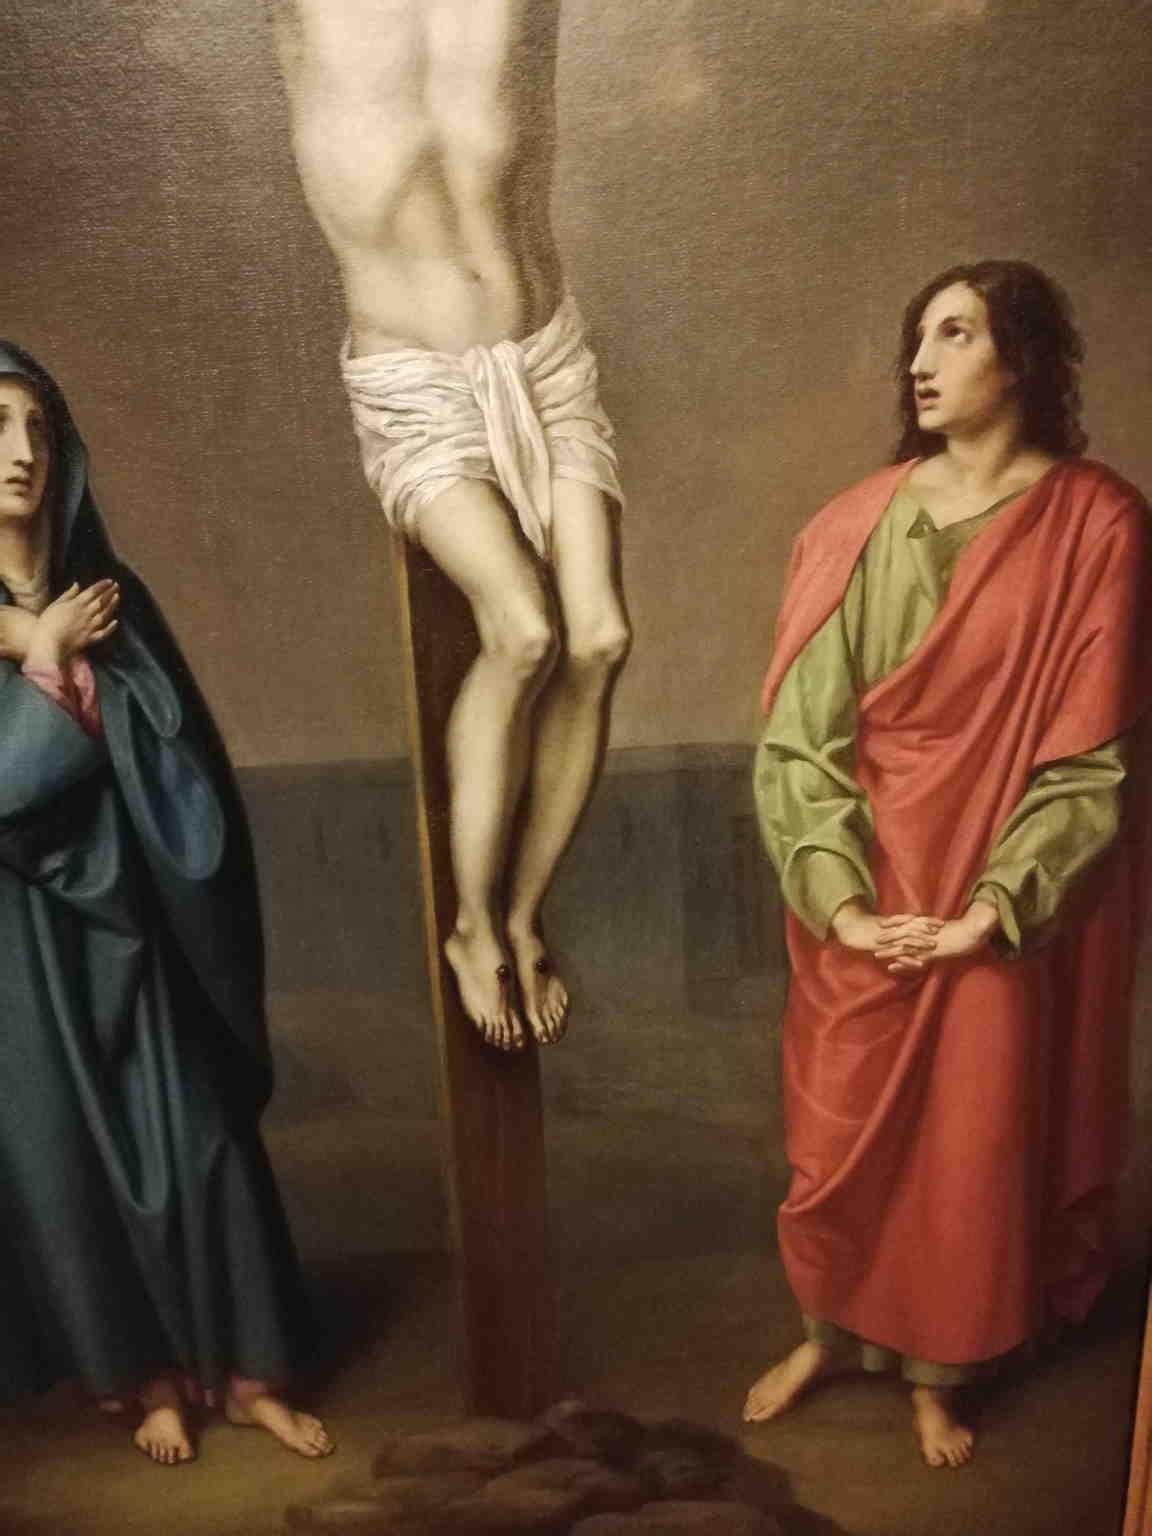 This painting (oil on canvas 97.5 x 63.5 cm; 104 x 71 cm with frame) represents a crucifixion.
The white body of Christ stands out in the center, surrounded by the Virgin Mary and Saint John in sorrow.

Even if it's a scene of death and sufferance,